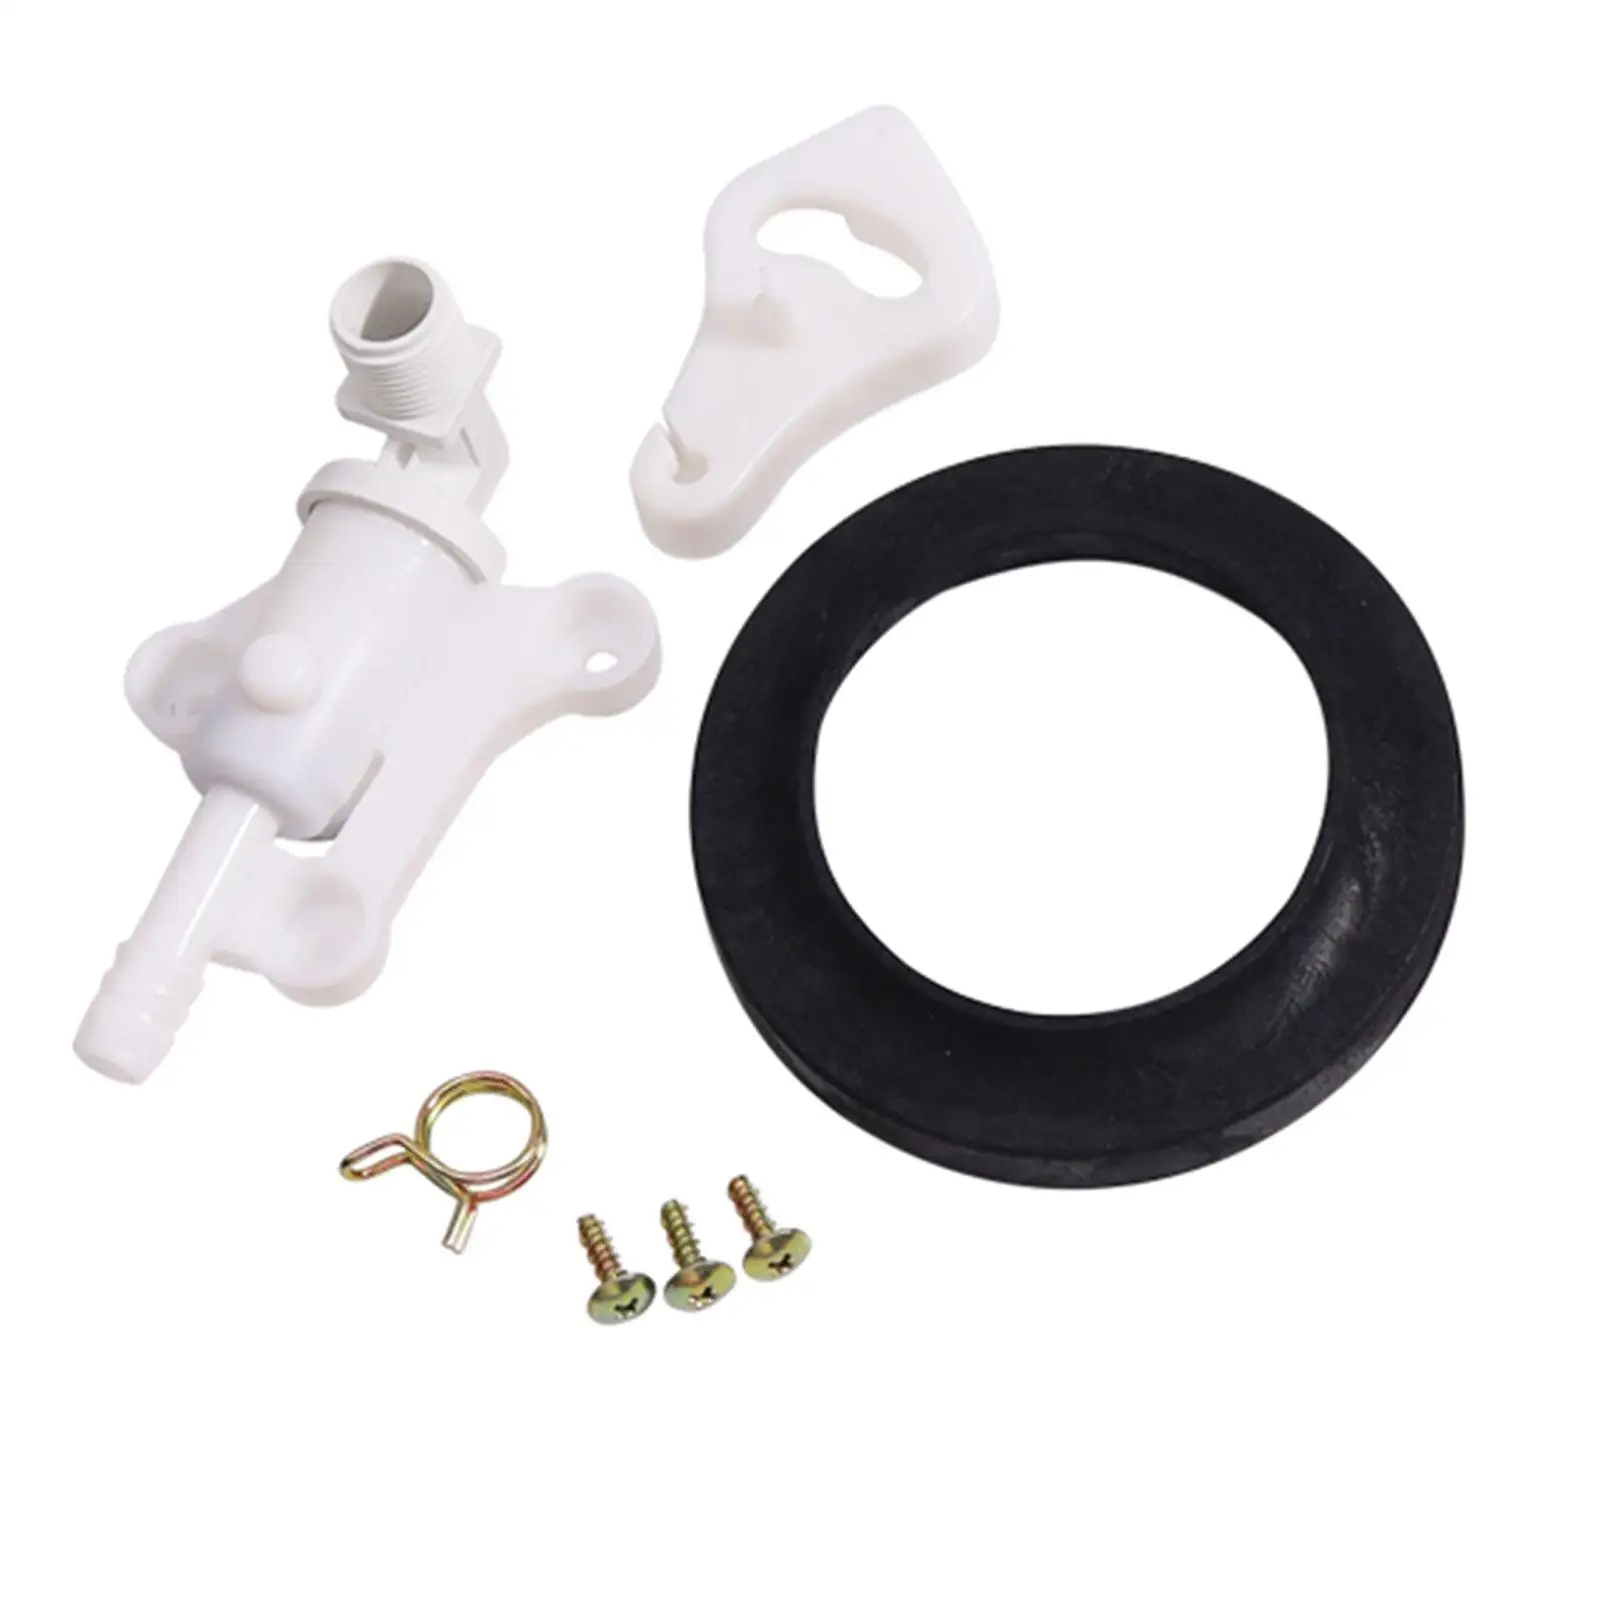 34100 Water Valve with Seal for Style Lite Toilets Replace Parts Accessories for